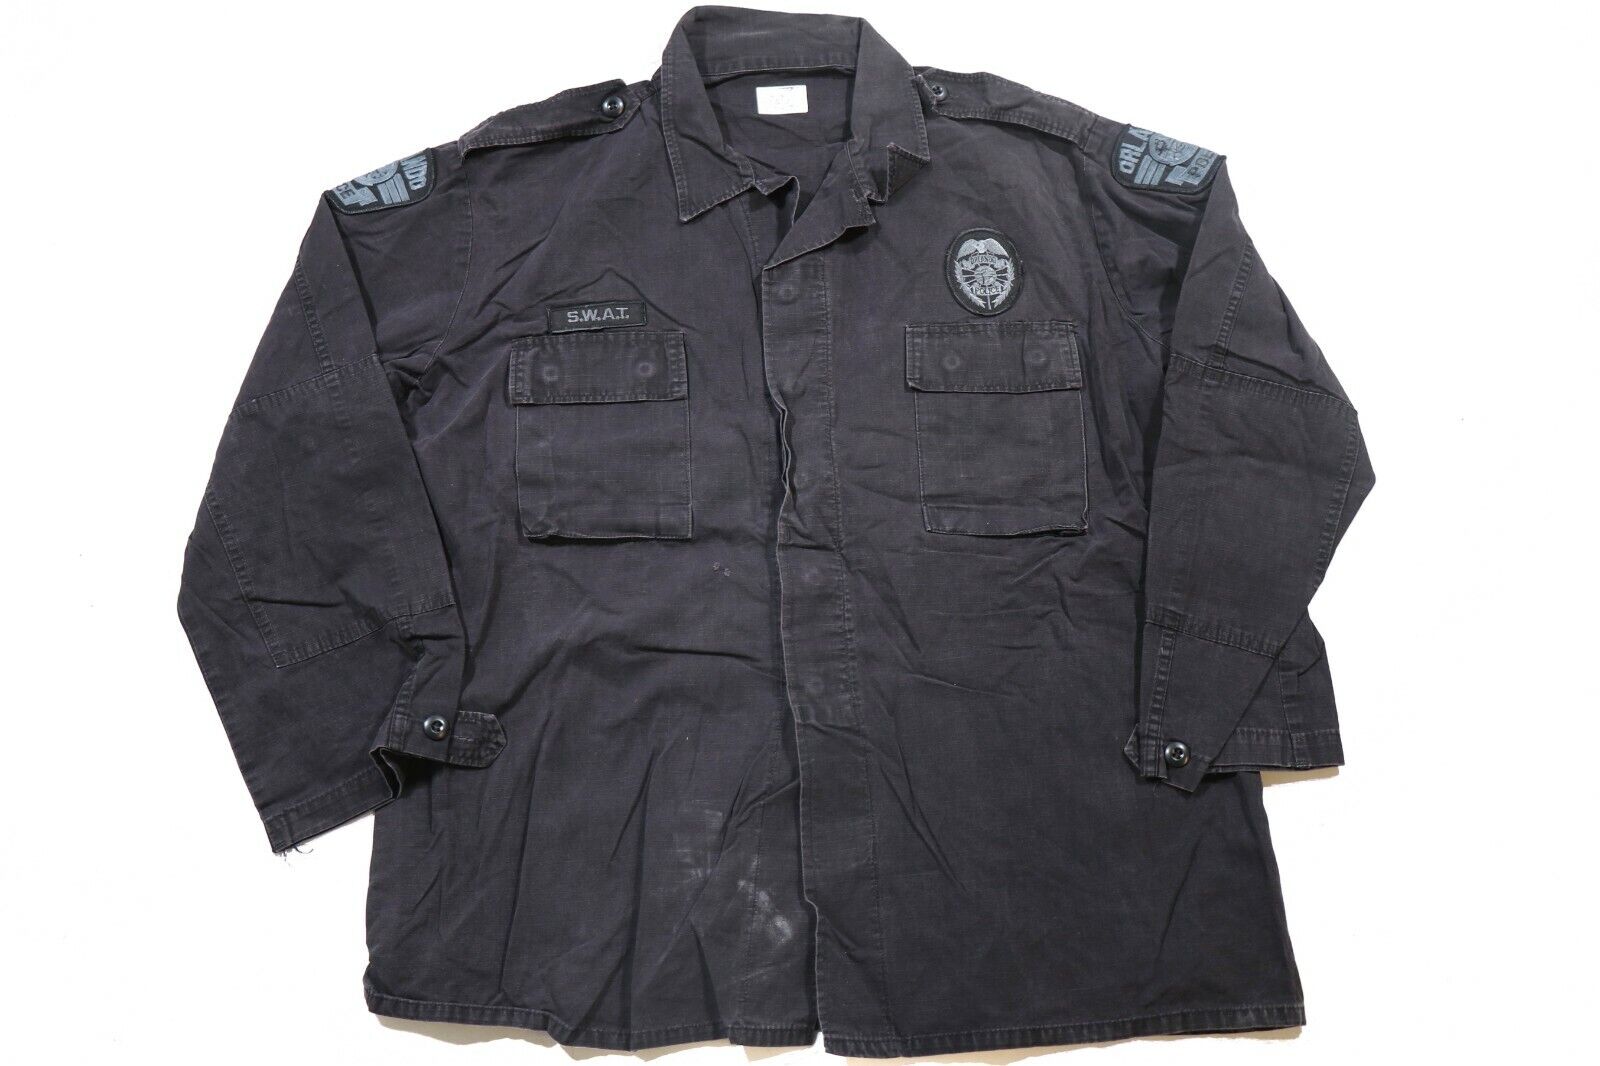 Authentic 1990s Orlando Police SWAT Jacket Shirt Rip-Stop Poplin Issued 